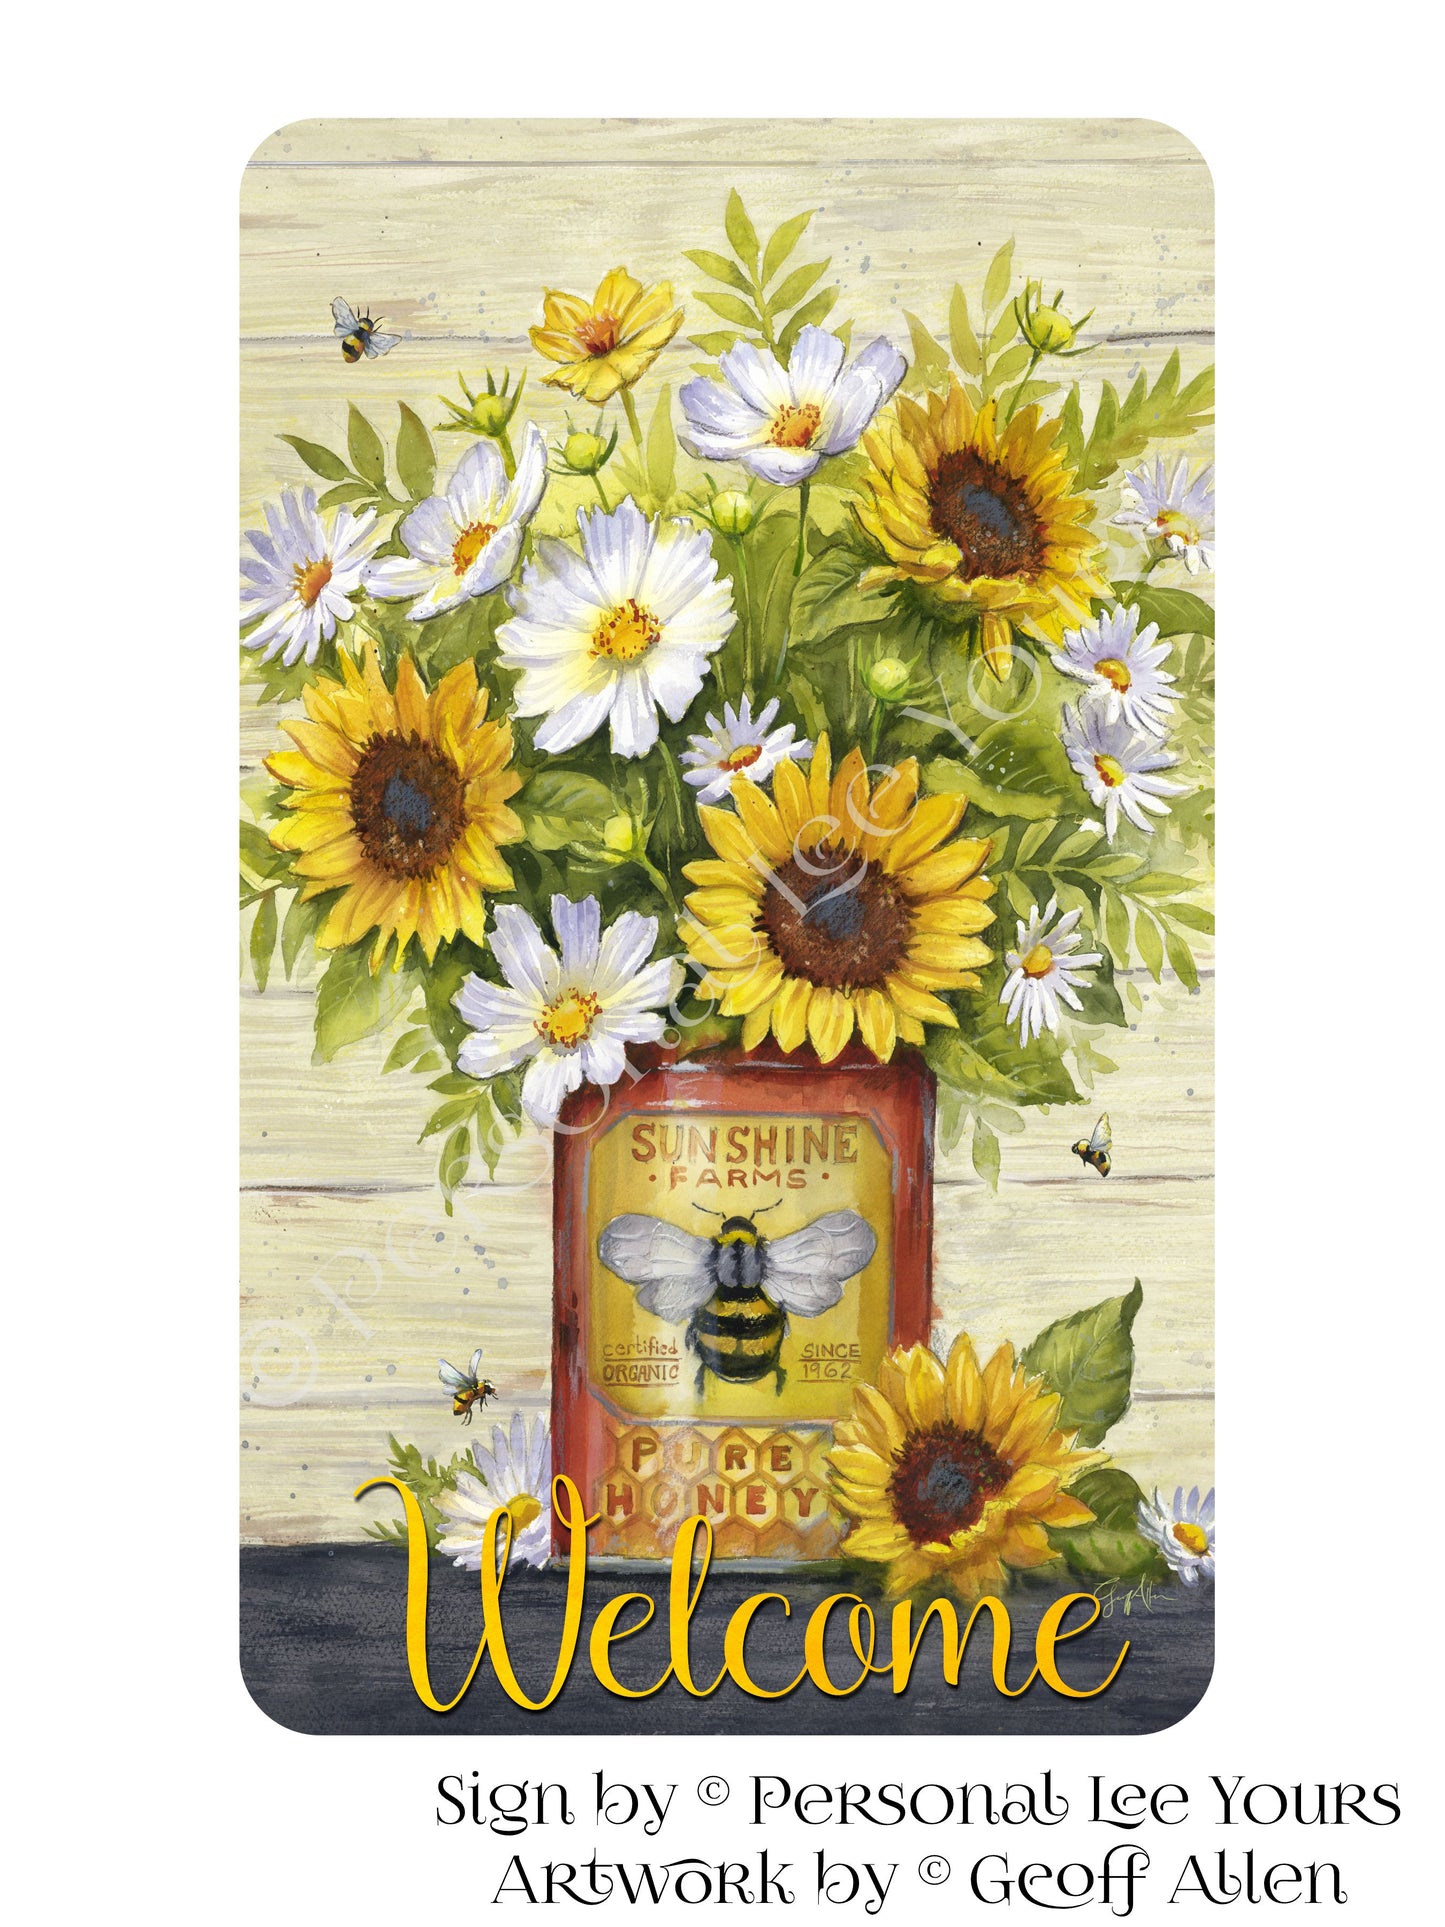 Geoff Allen Exclusive Sign * Honey Bee Tin Welcome * Sunflowers and Daisies * 4 Sizes * Lightweight Metal